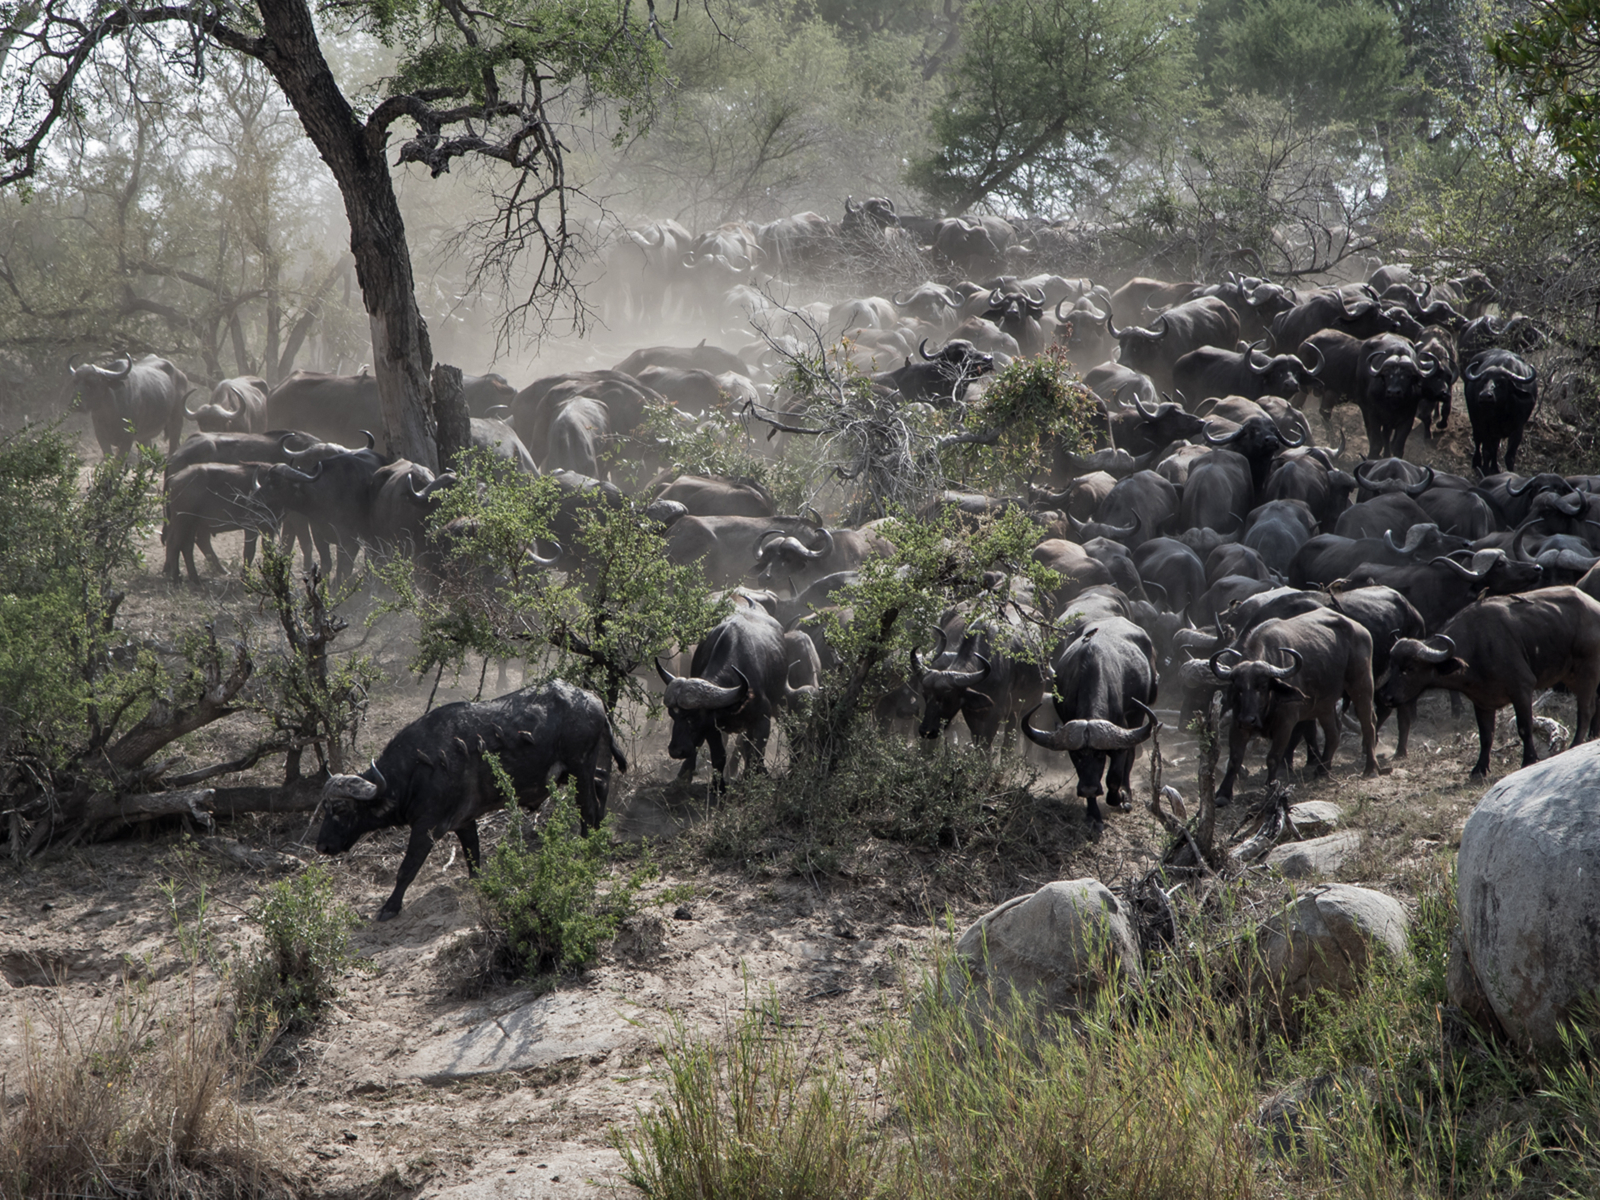 Herd of buffalo crossing the river at the Mana Mana Game Reserve, one of the best safaris in Africa